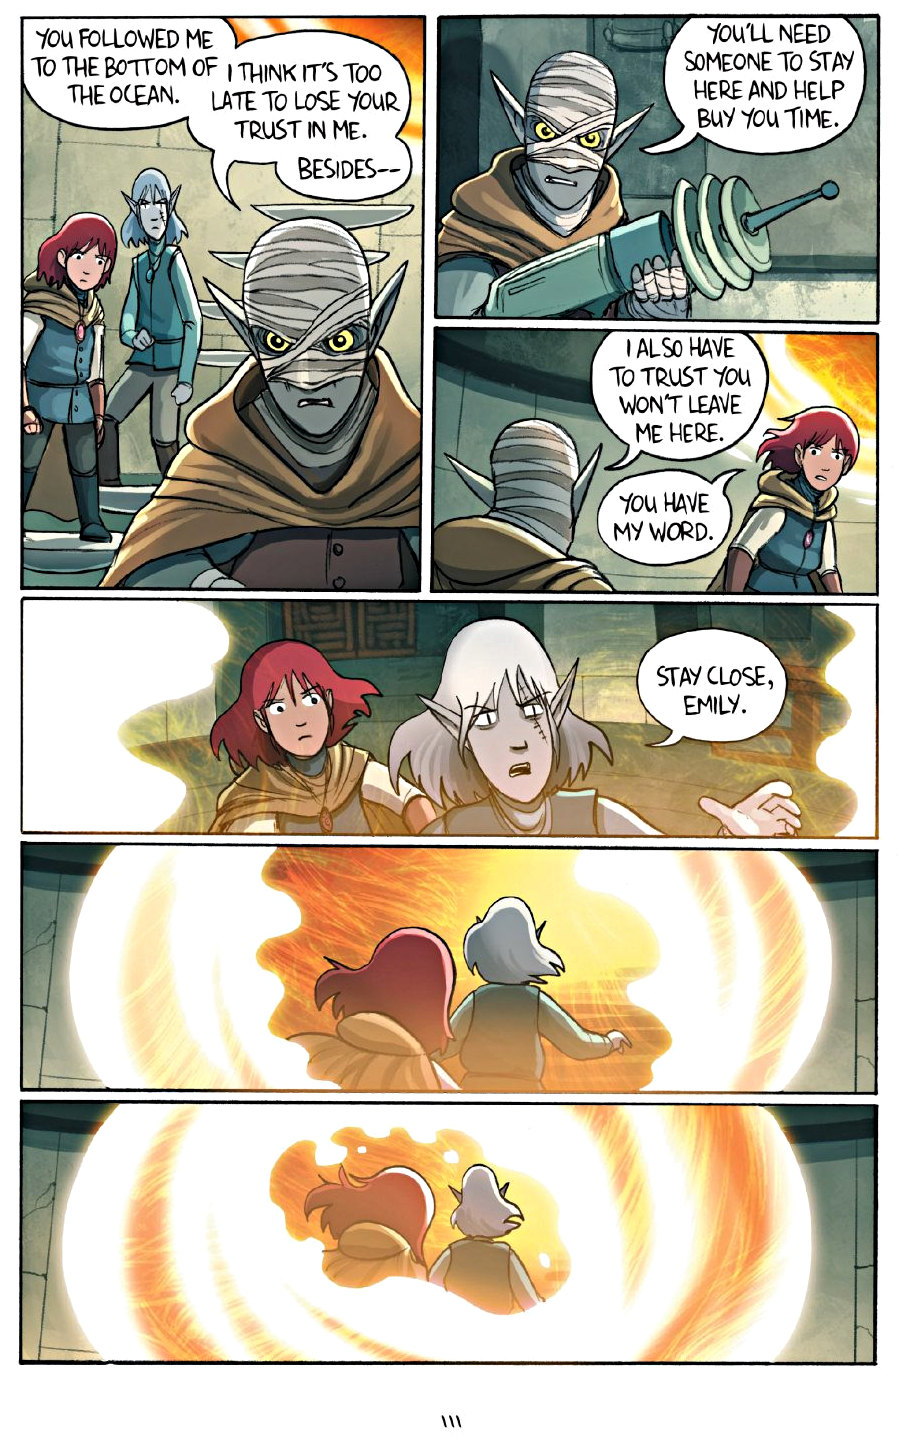 page 111 of amulet 7 firelight graphic novel